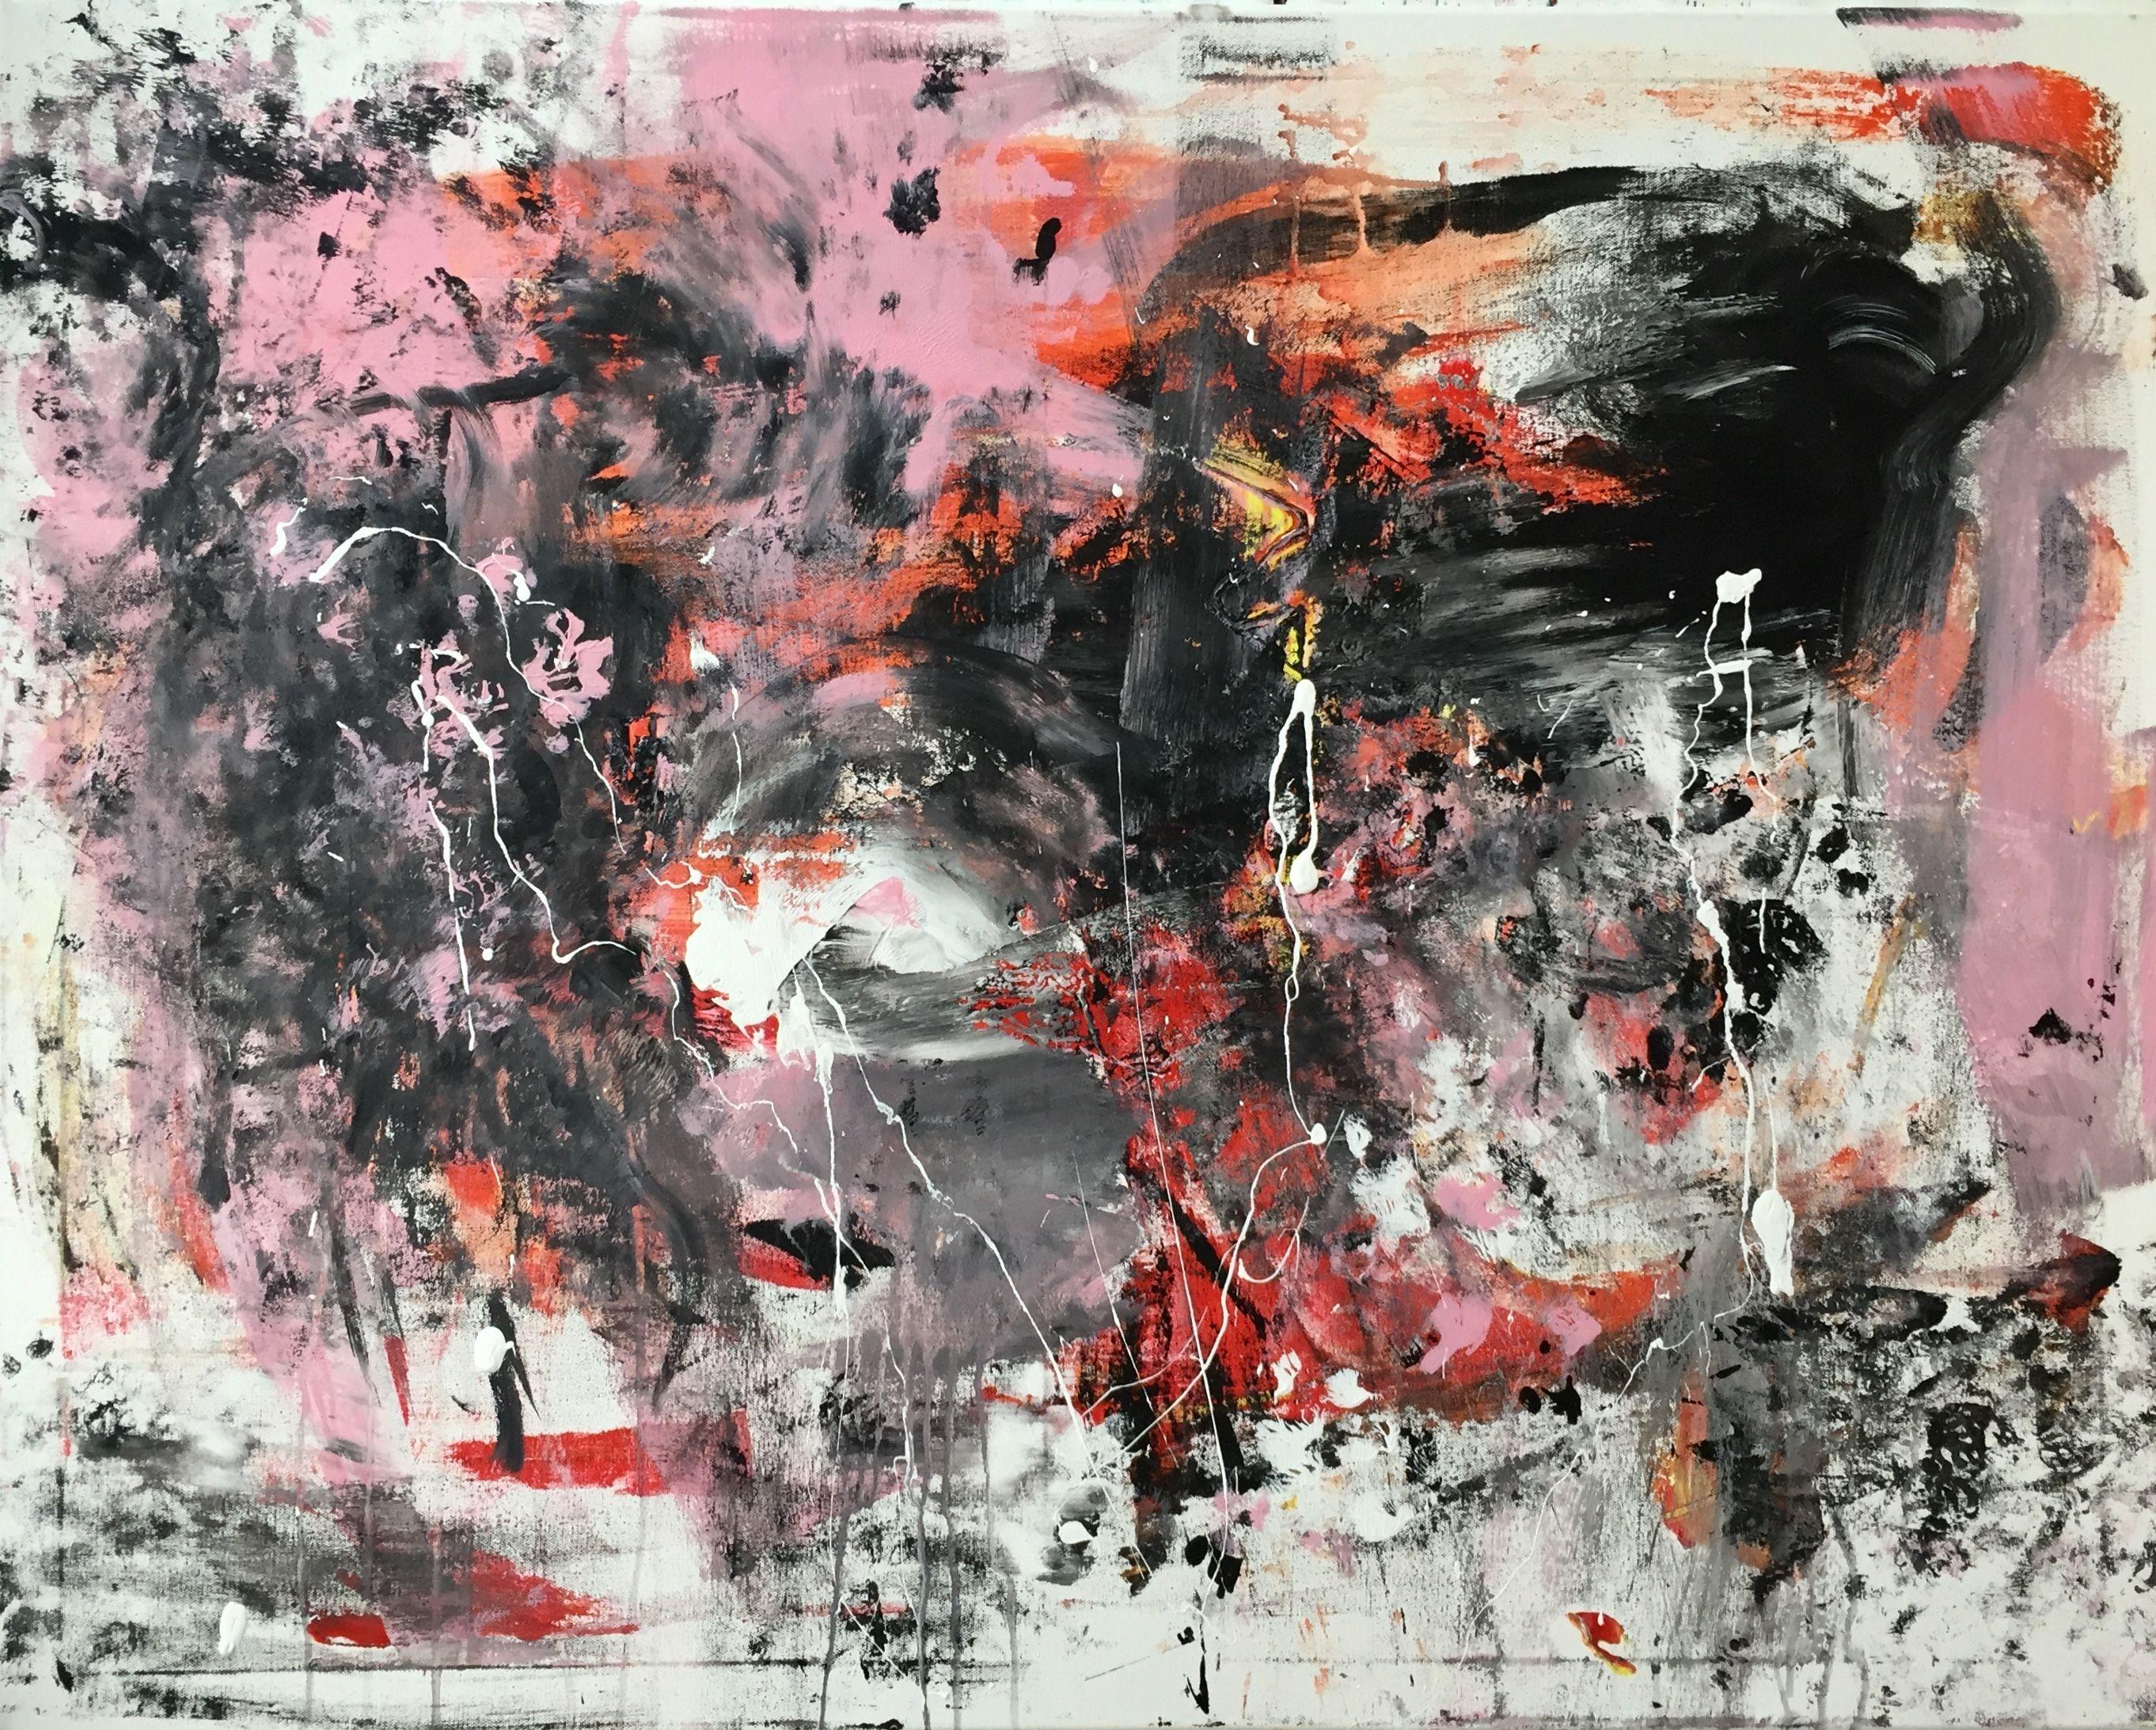 "Eruption" is an expressive, abstract acrylic painting on canvas. It's full of dynamism and passion. Expressive, gestural, dynamic. The choice of colors is reduced to black, grey, white, pink and a little bit of orange.   It can be a volcanic